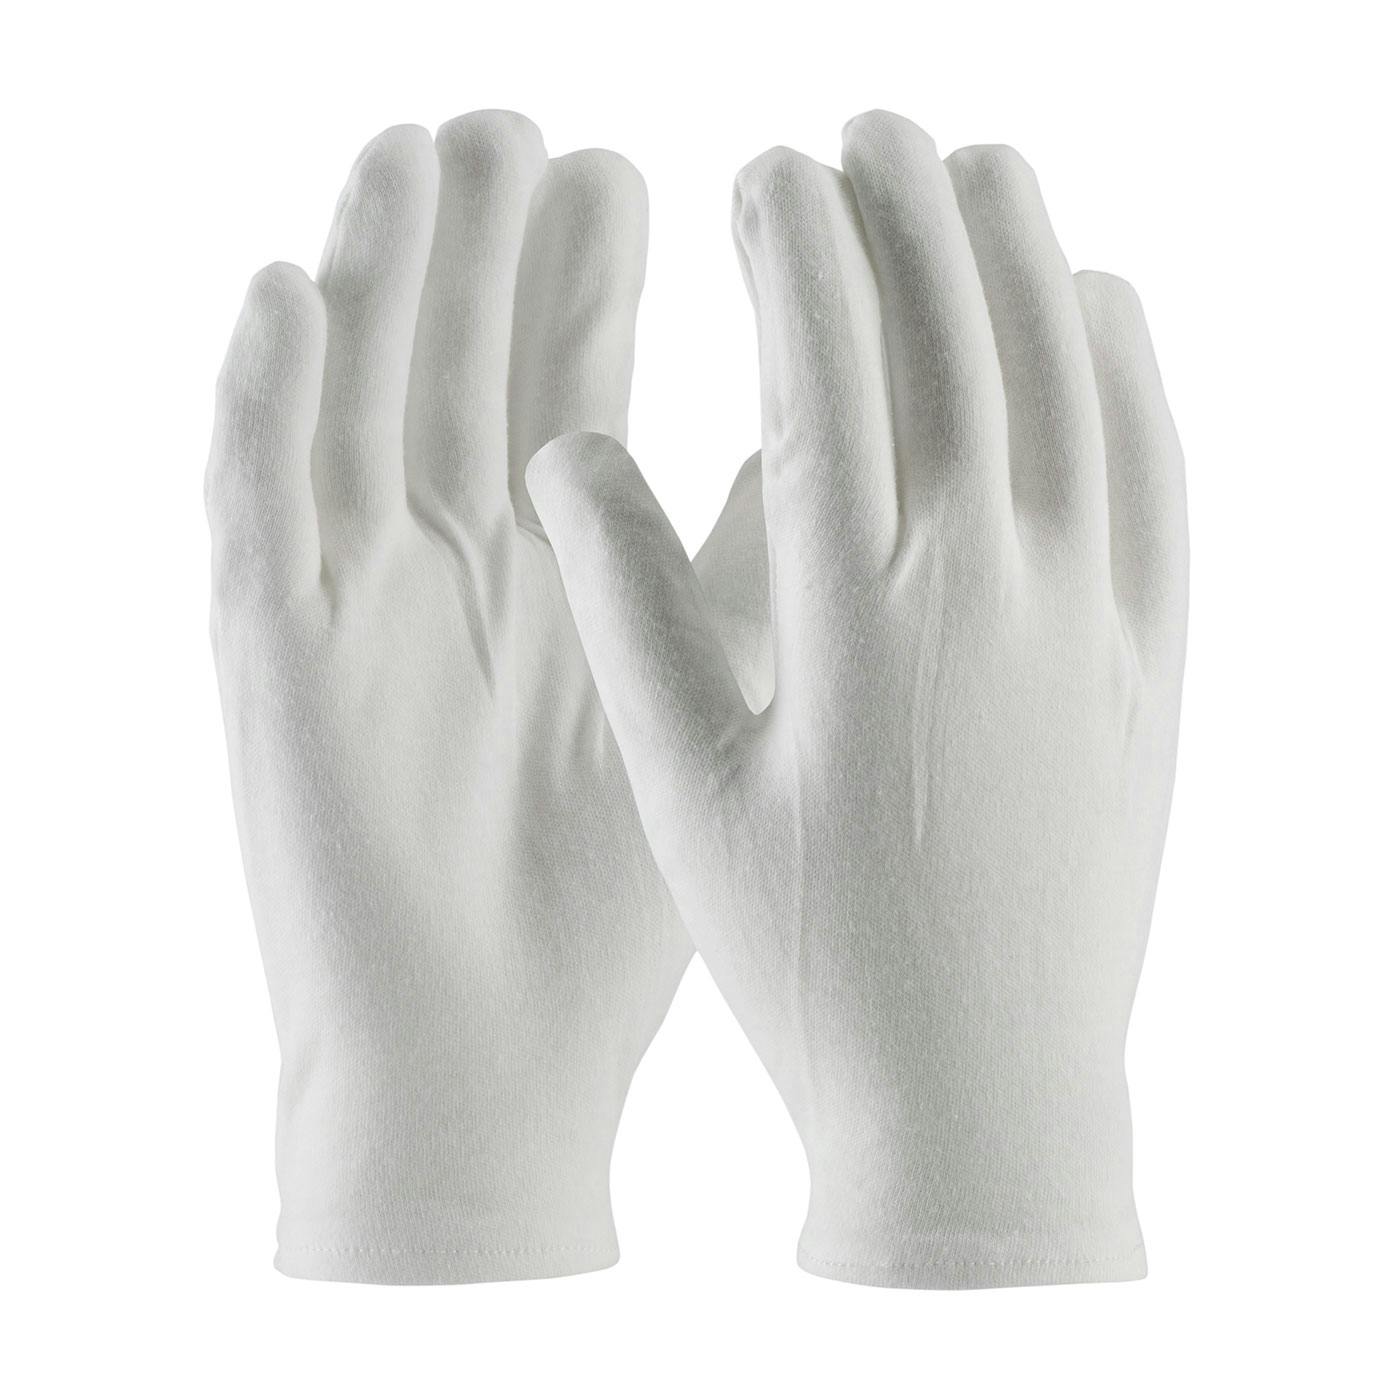 Heavy Weight Cotton Lisle Inspection Glove with Rolled Hem Cuff - Men's, White (97-540R) - MENS